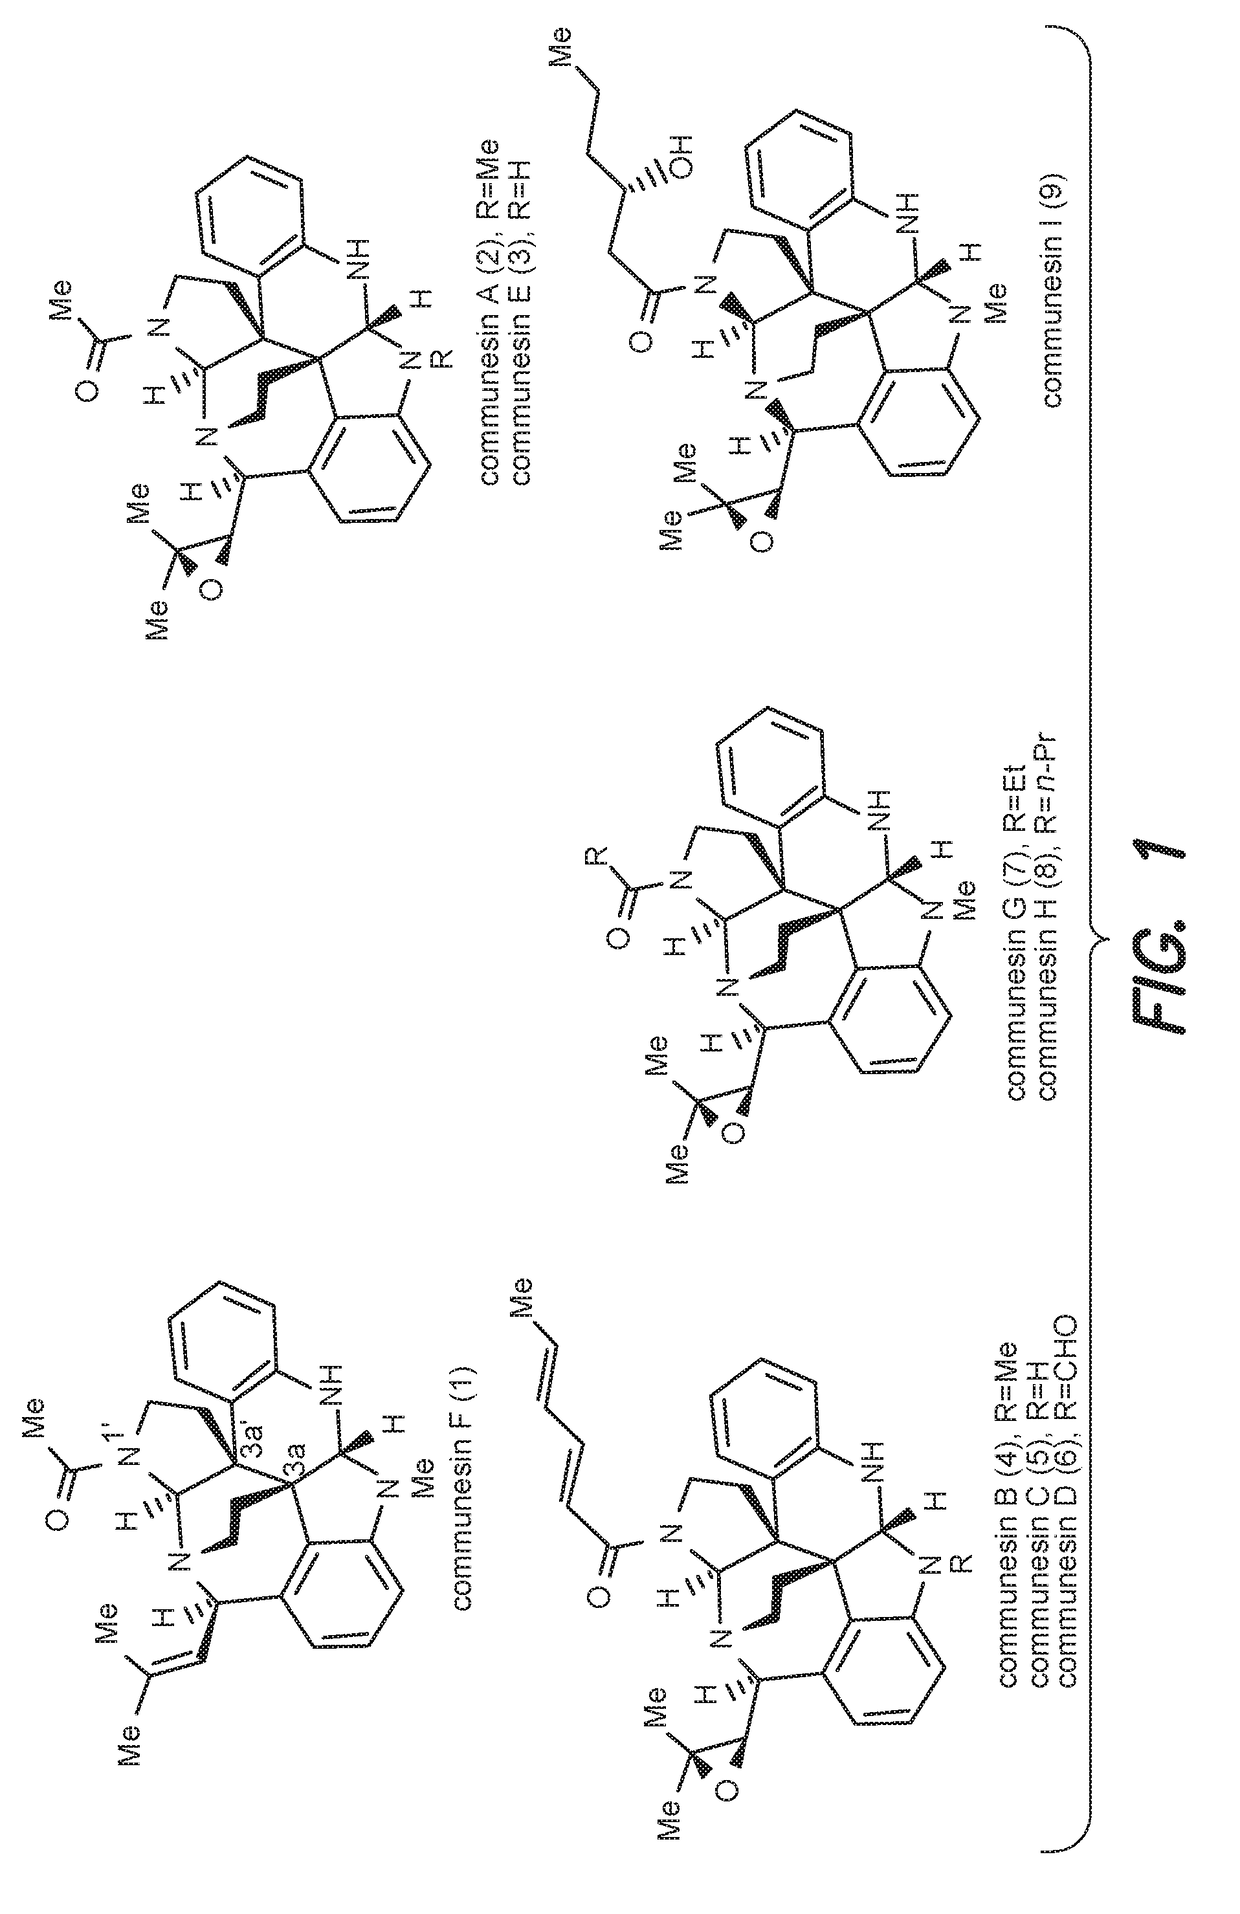 Convergent and enantioselective total synthesis of communesin analogs